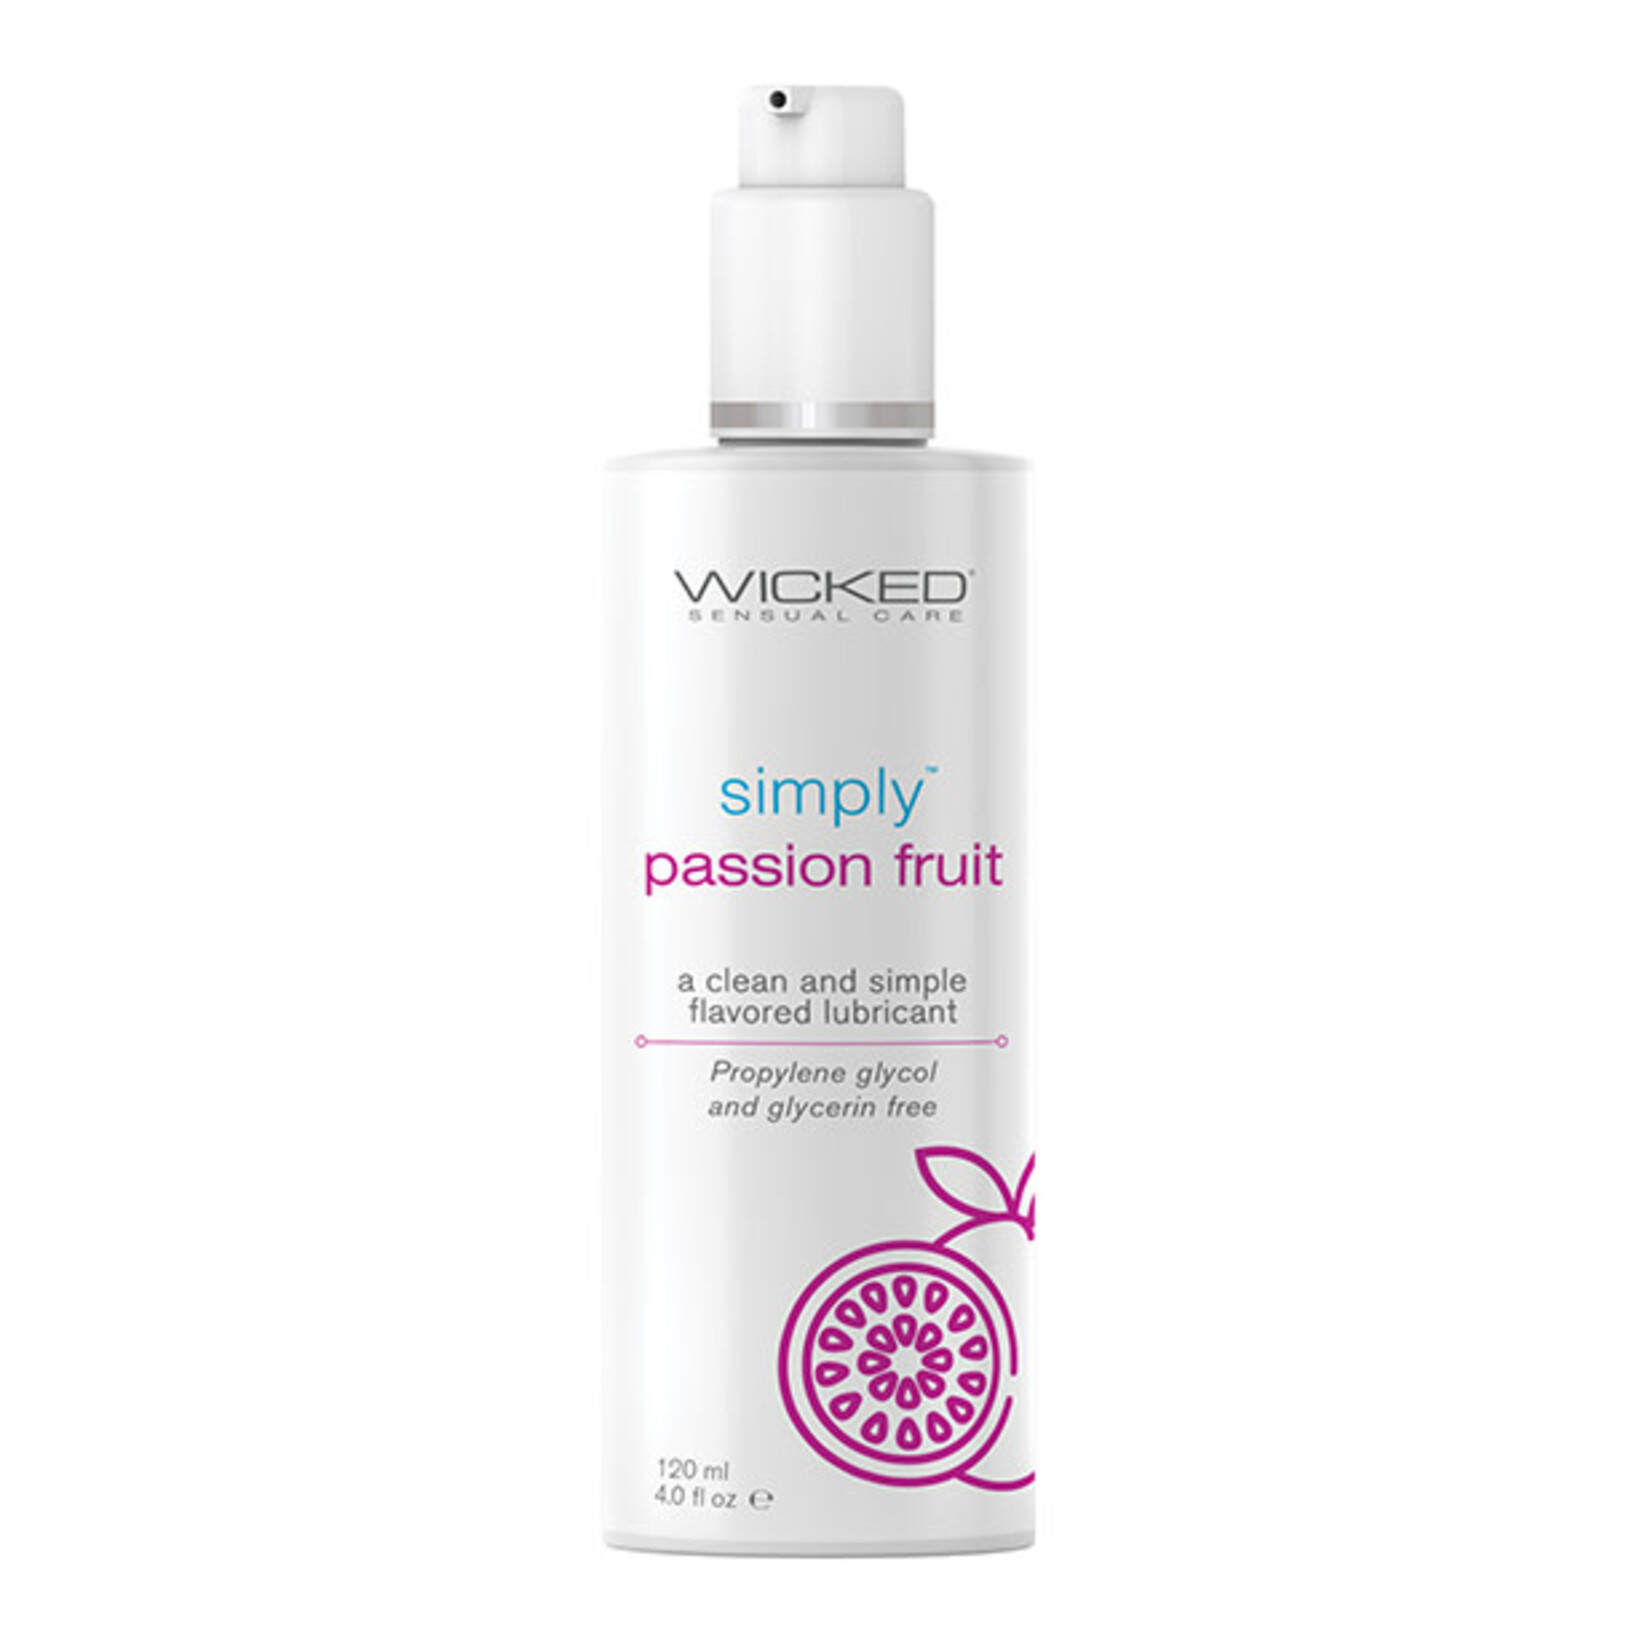 WICKED - SIMPLY PASSION FRUIT LUBE - 4OZ